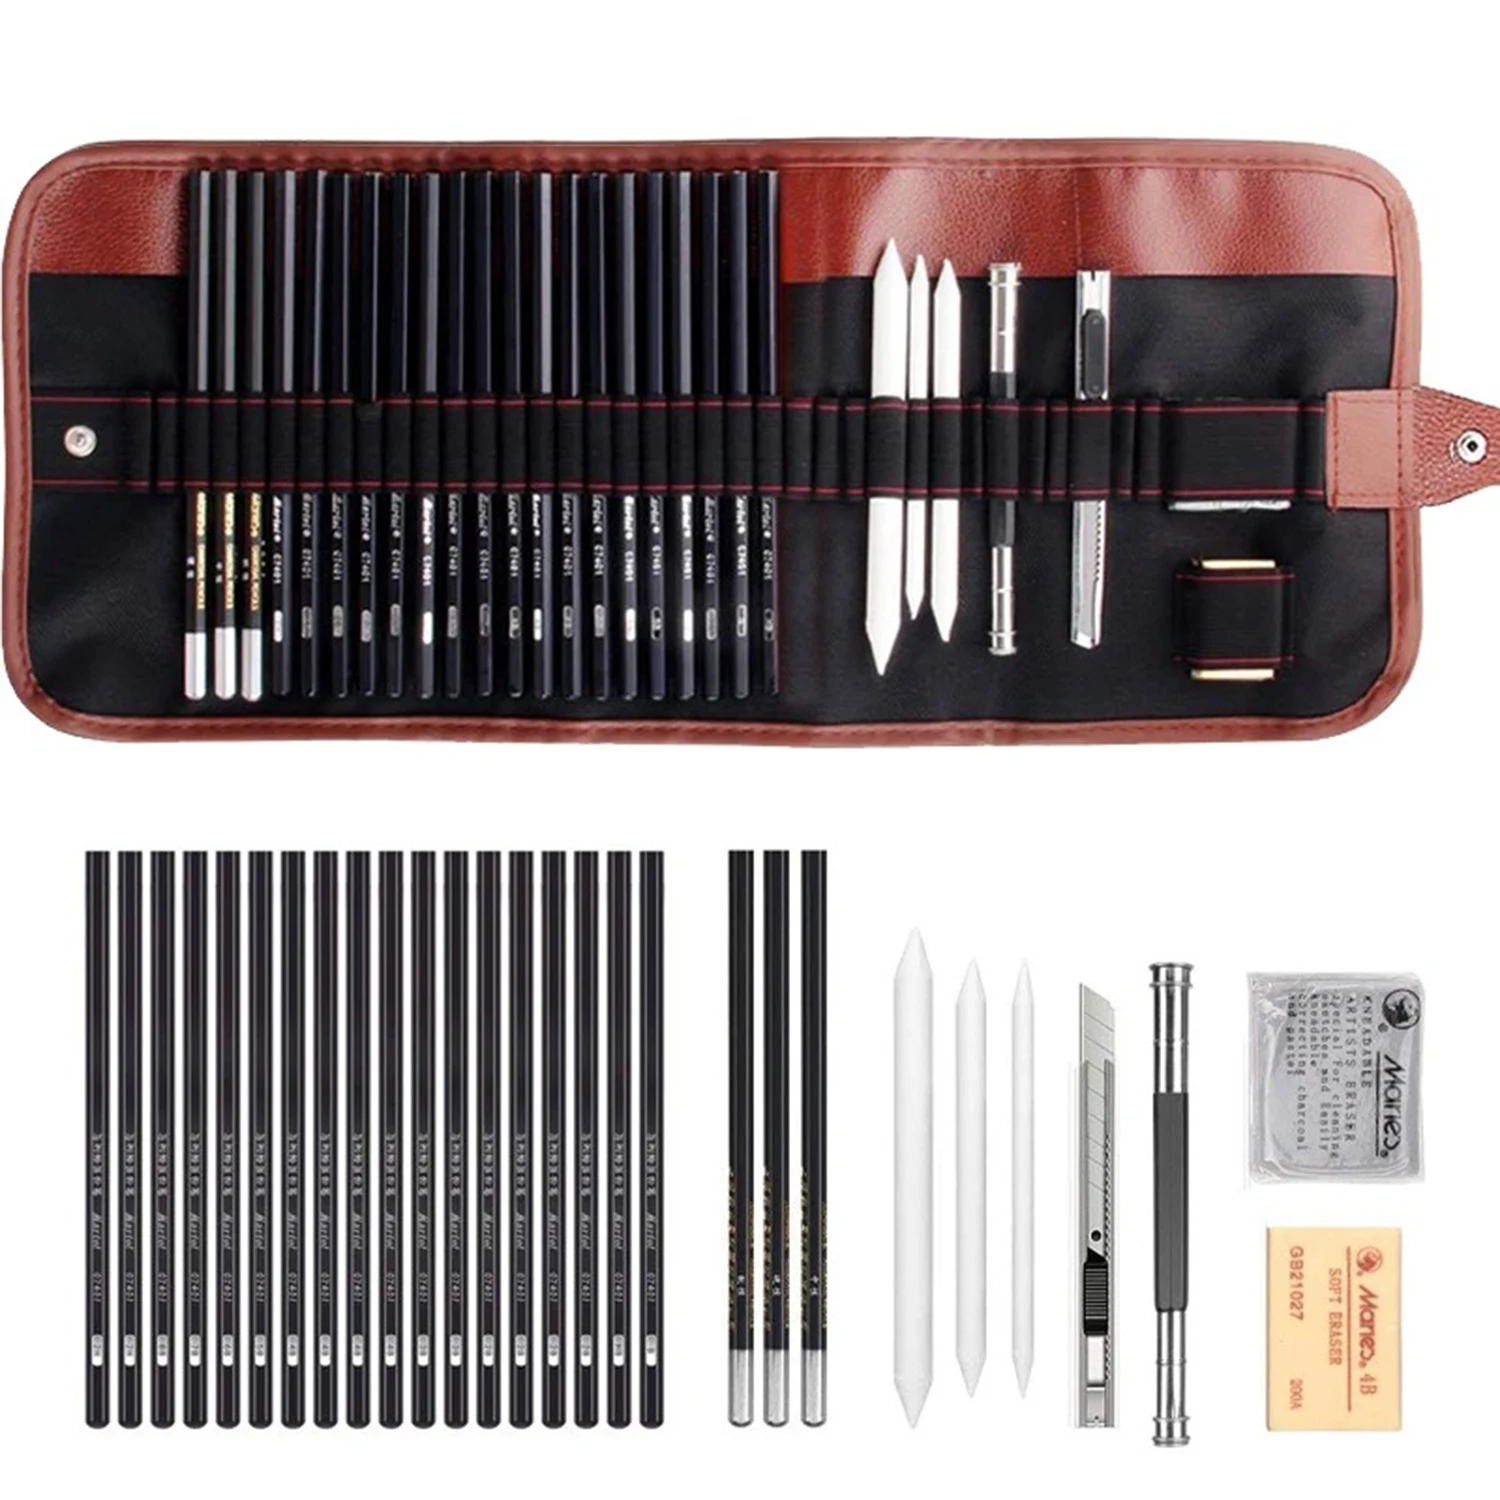 

Sketching Pencil Set Drawing Pencils and Sketch Kit,29-Piece Artist Kit Includes Graphite Pencils,Sketch Pencils Set for Drawing